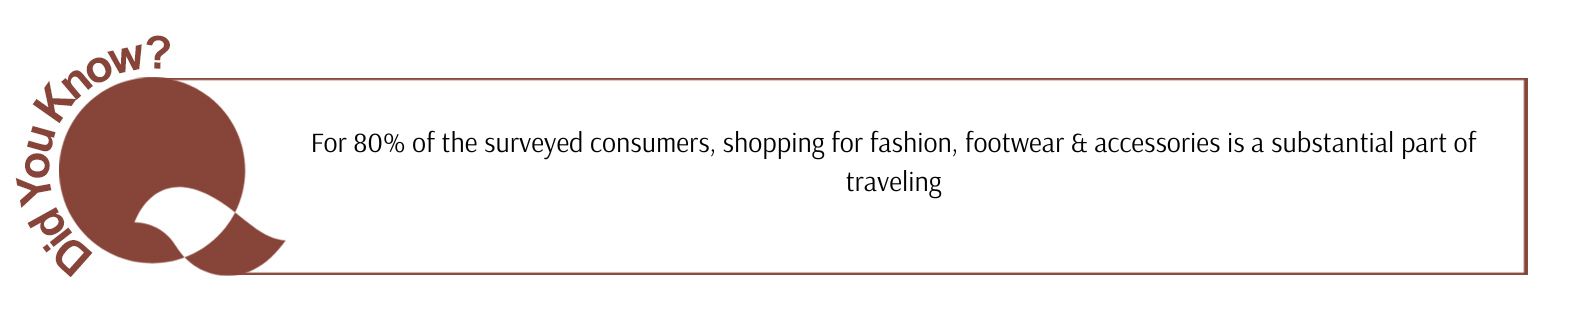 For 80% of the surveyed consumers, shopping for fashion, footwear & accessories is a substantial part of traveling